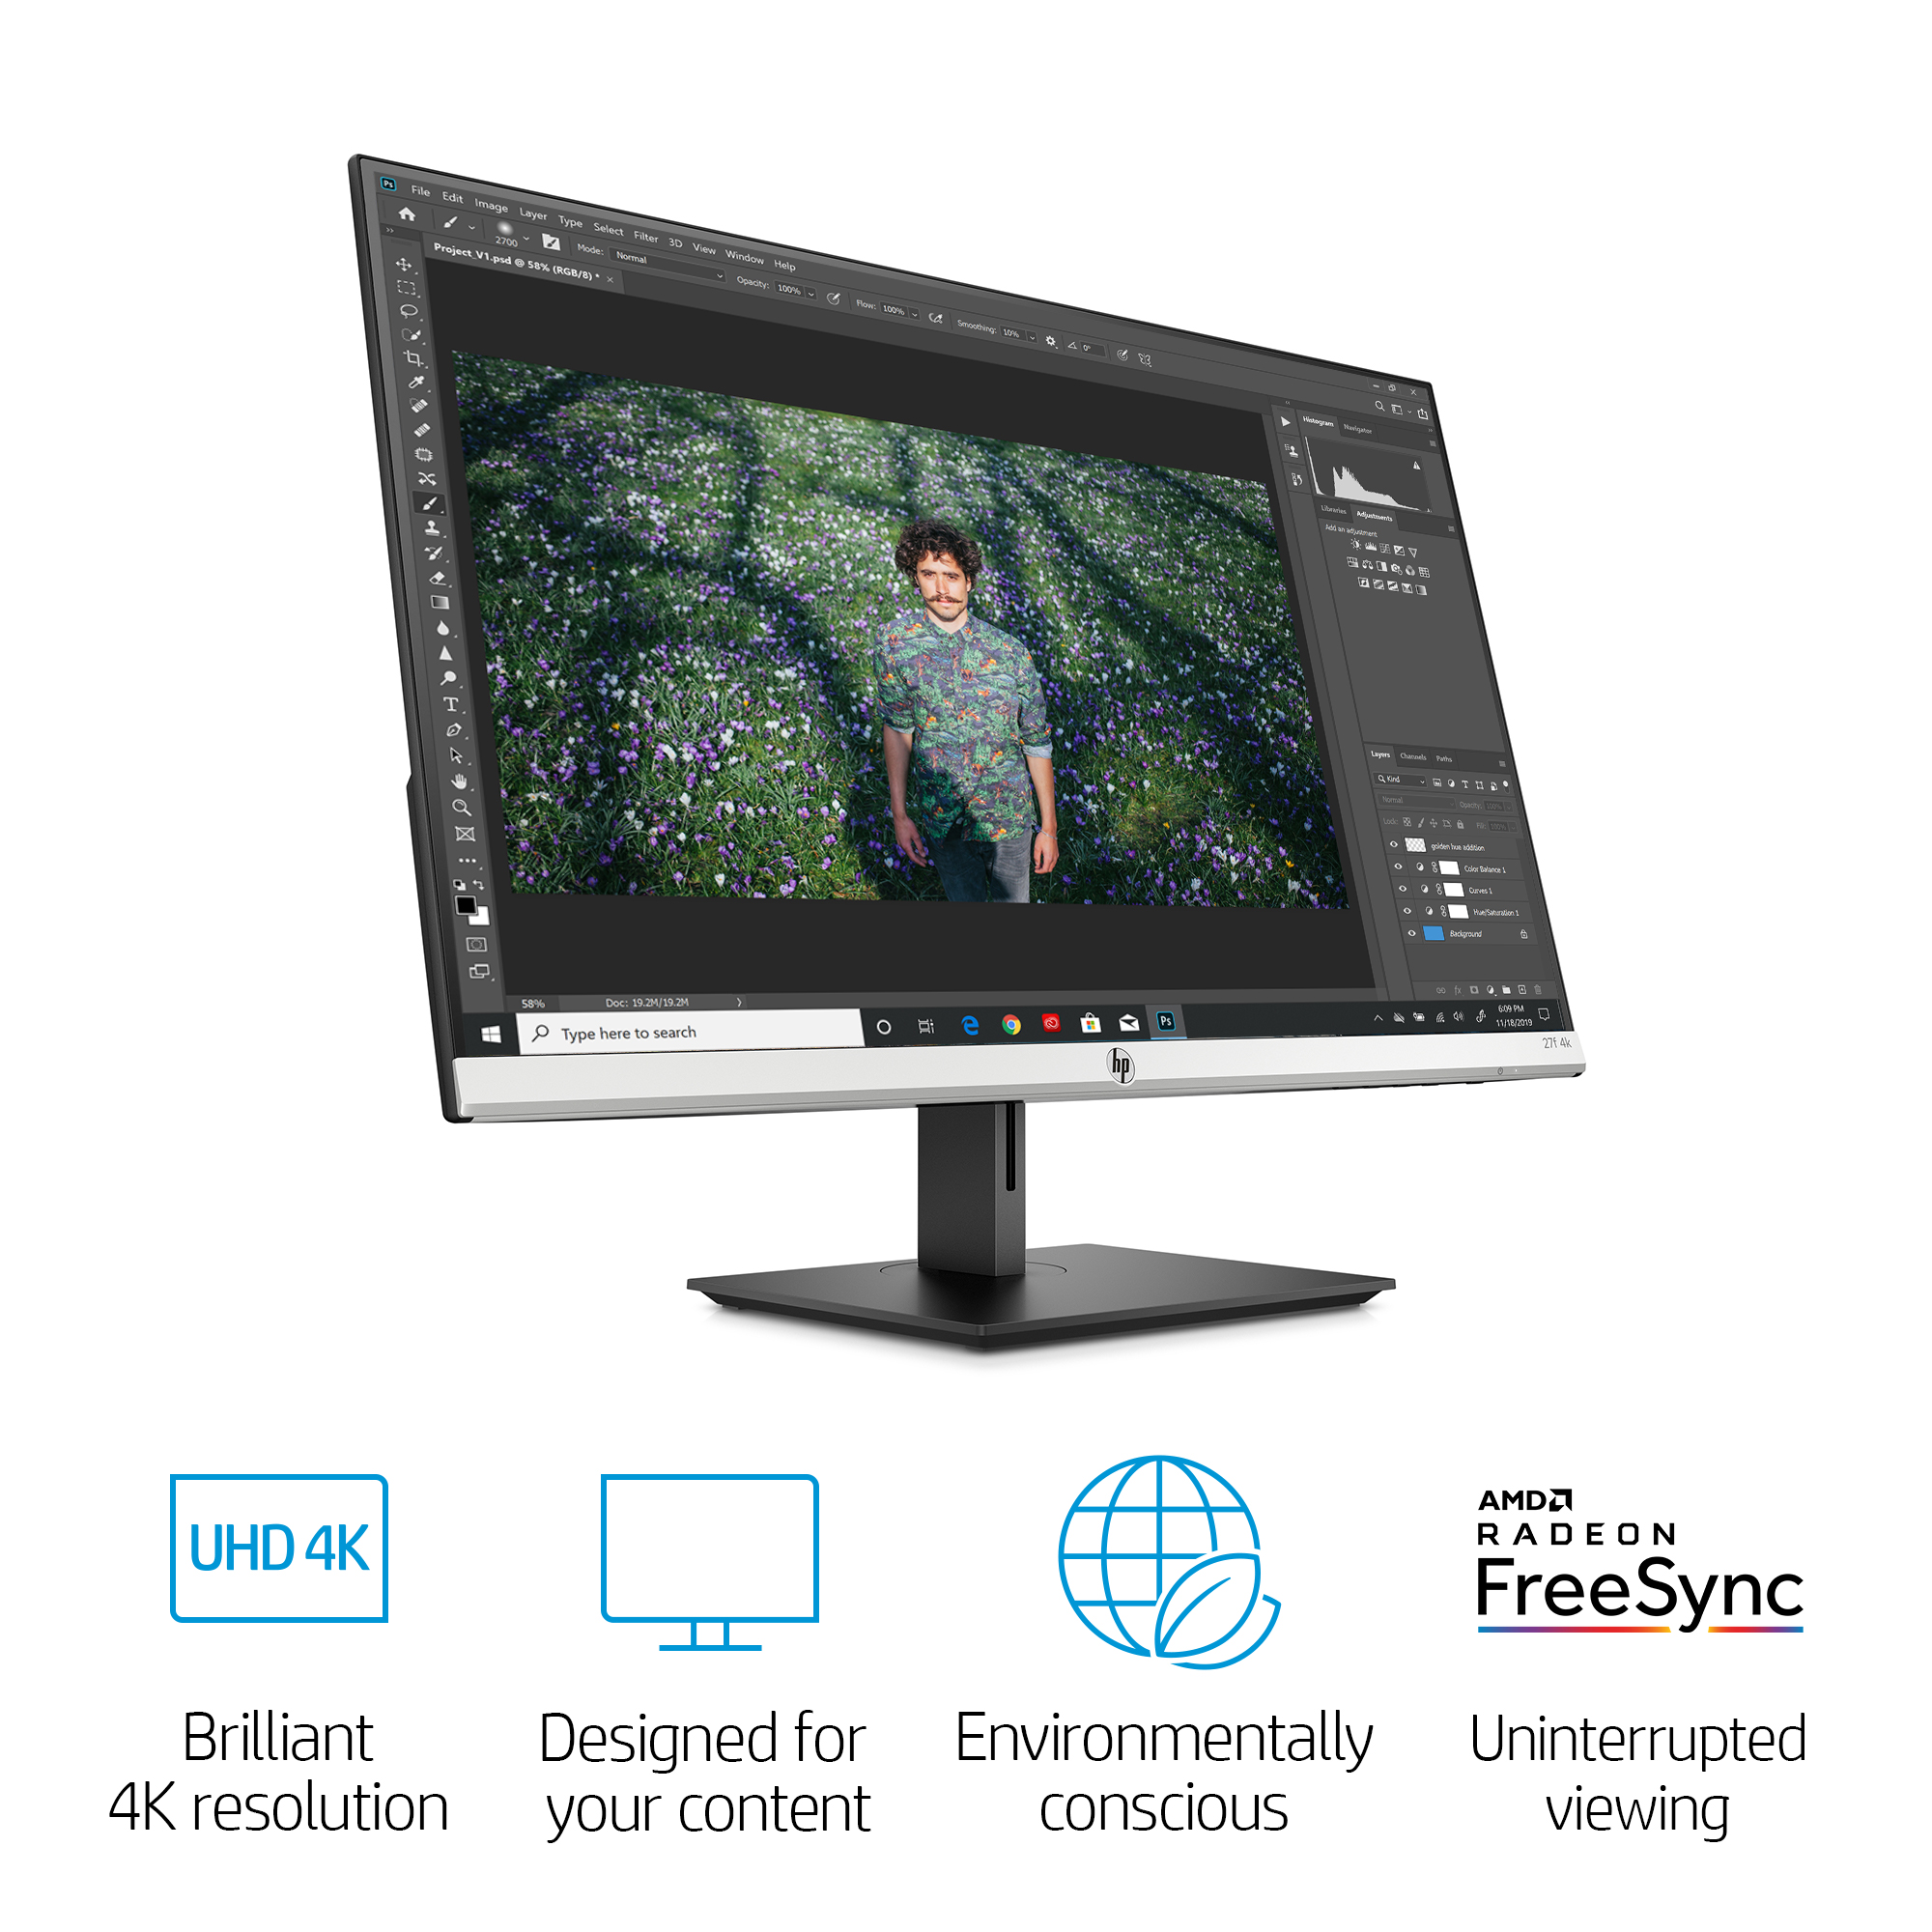 HP 27f 27-inch 4K-UHD (3840 x 2160) IPS Monitor with HDMIx2, VGA, Audio  Out, AMD Free Sync : : Computers & Accessories